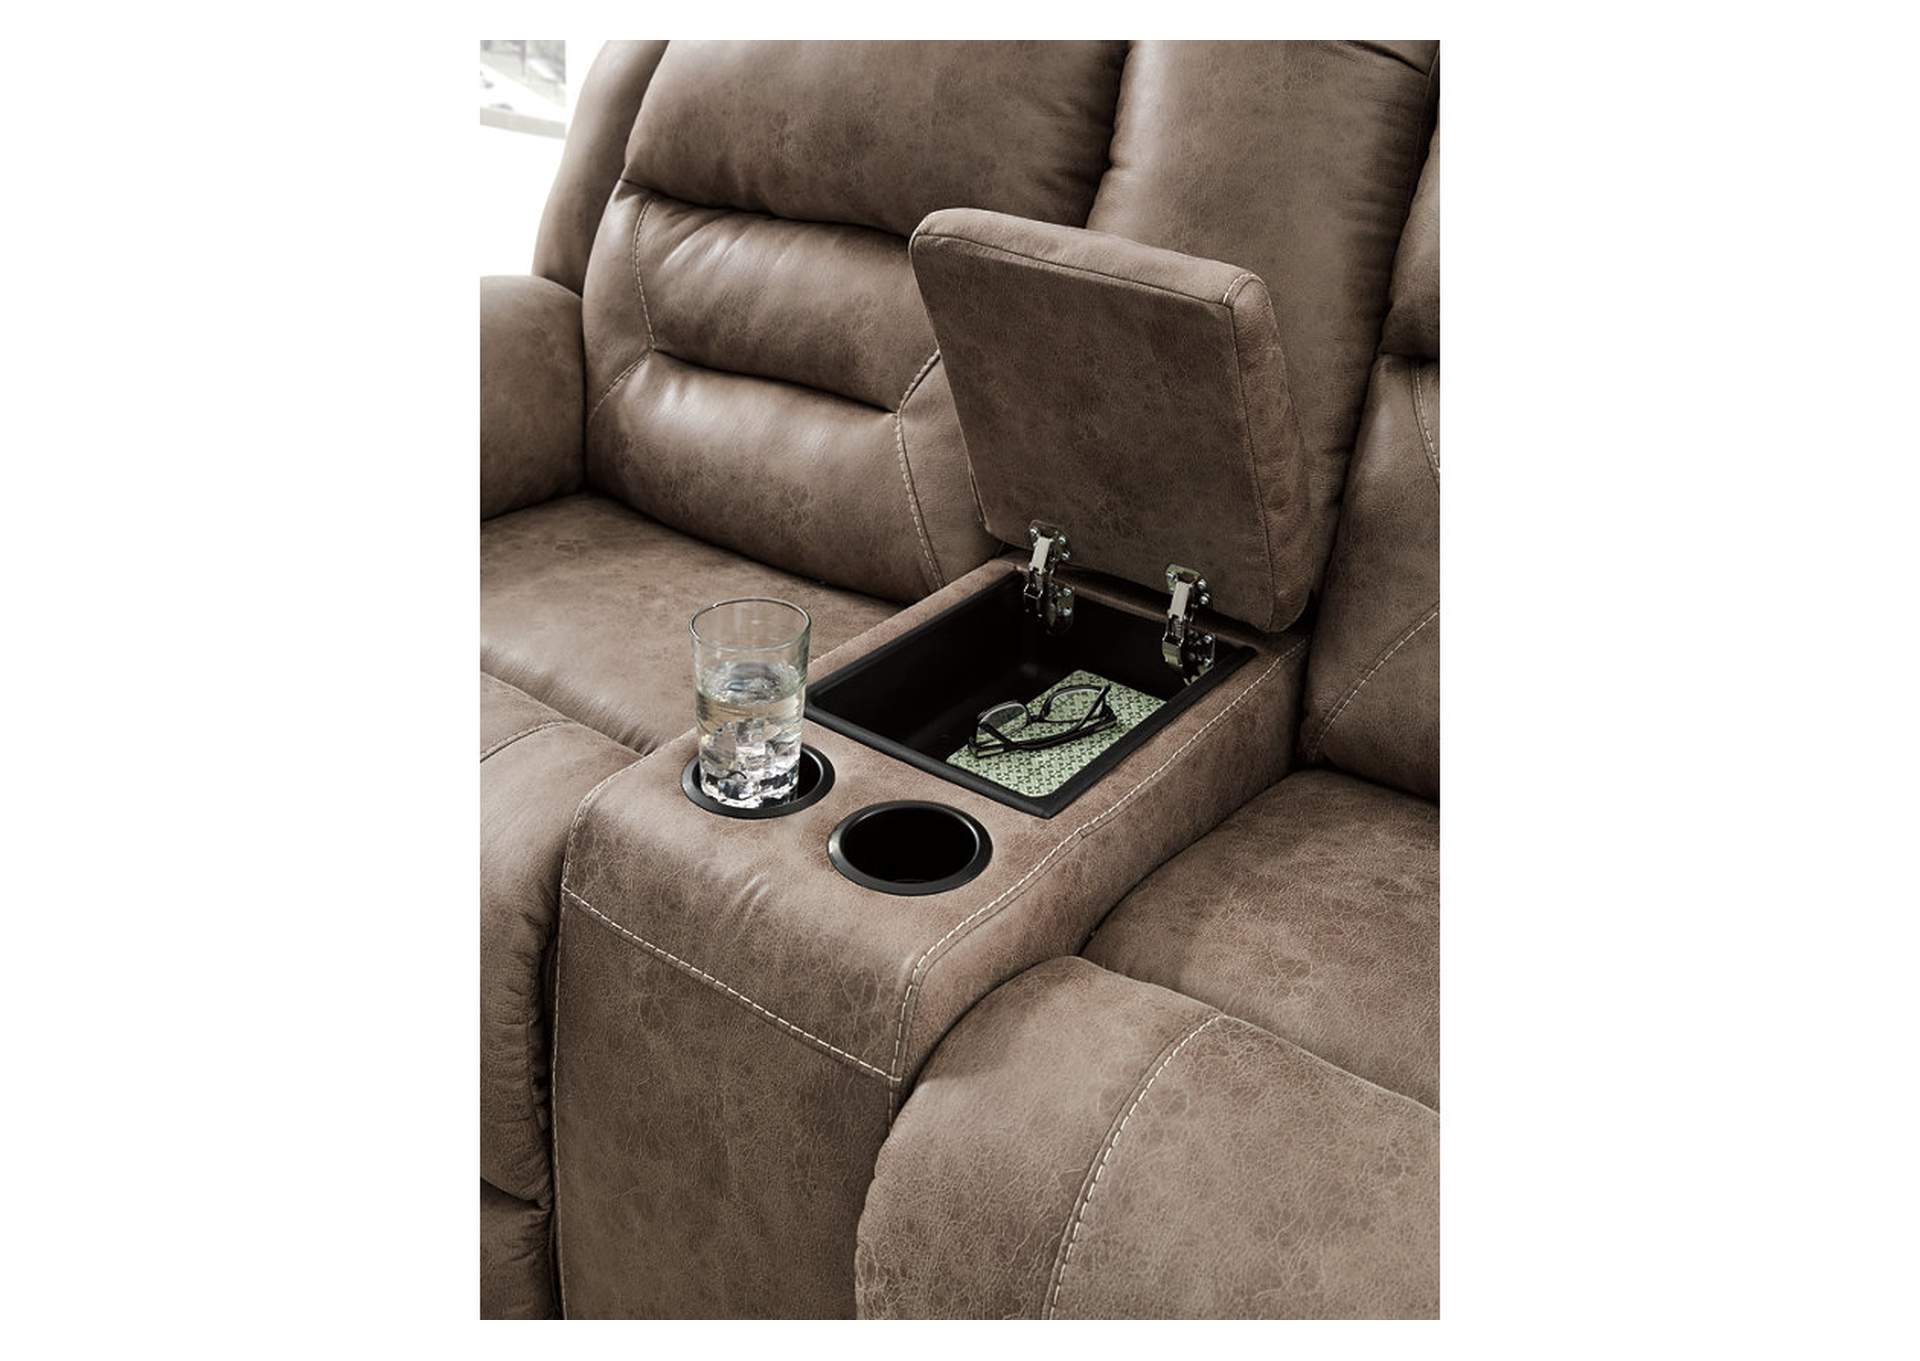 Stoneland Power Reclining Loveseat with Console,Signature Design By Ashley